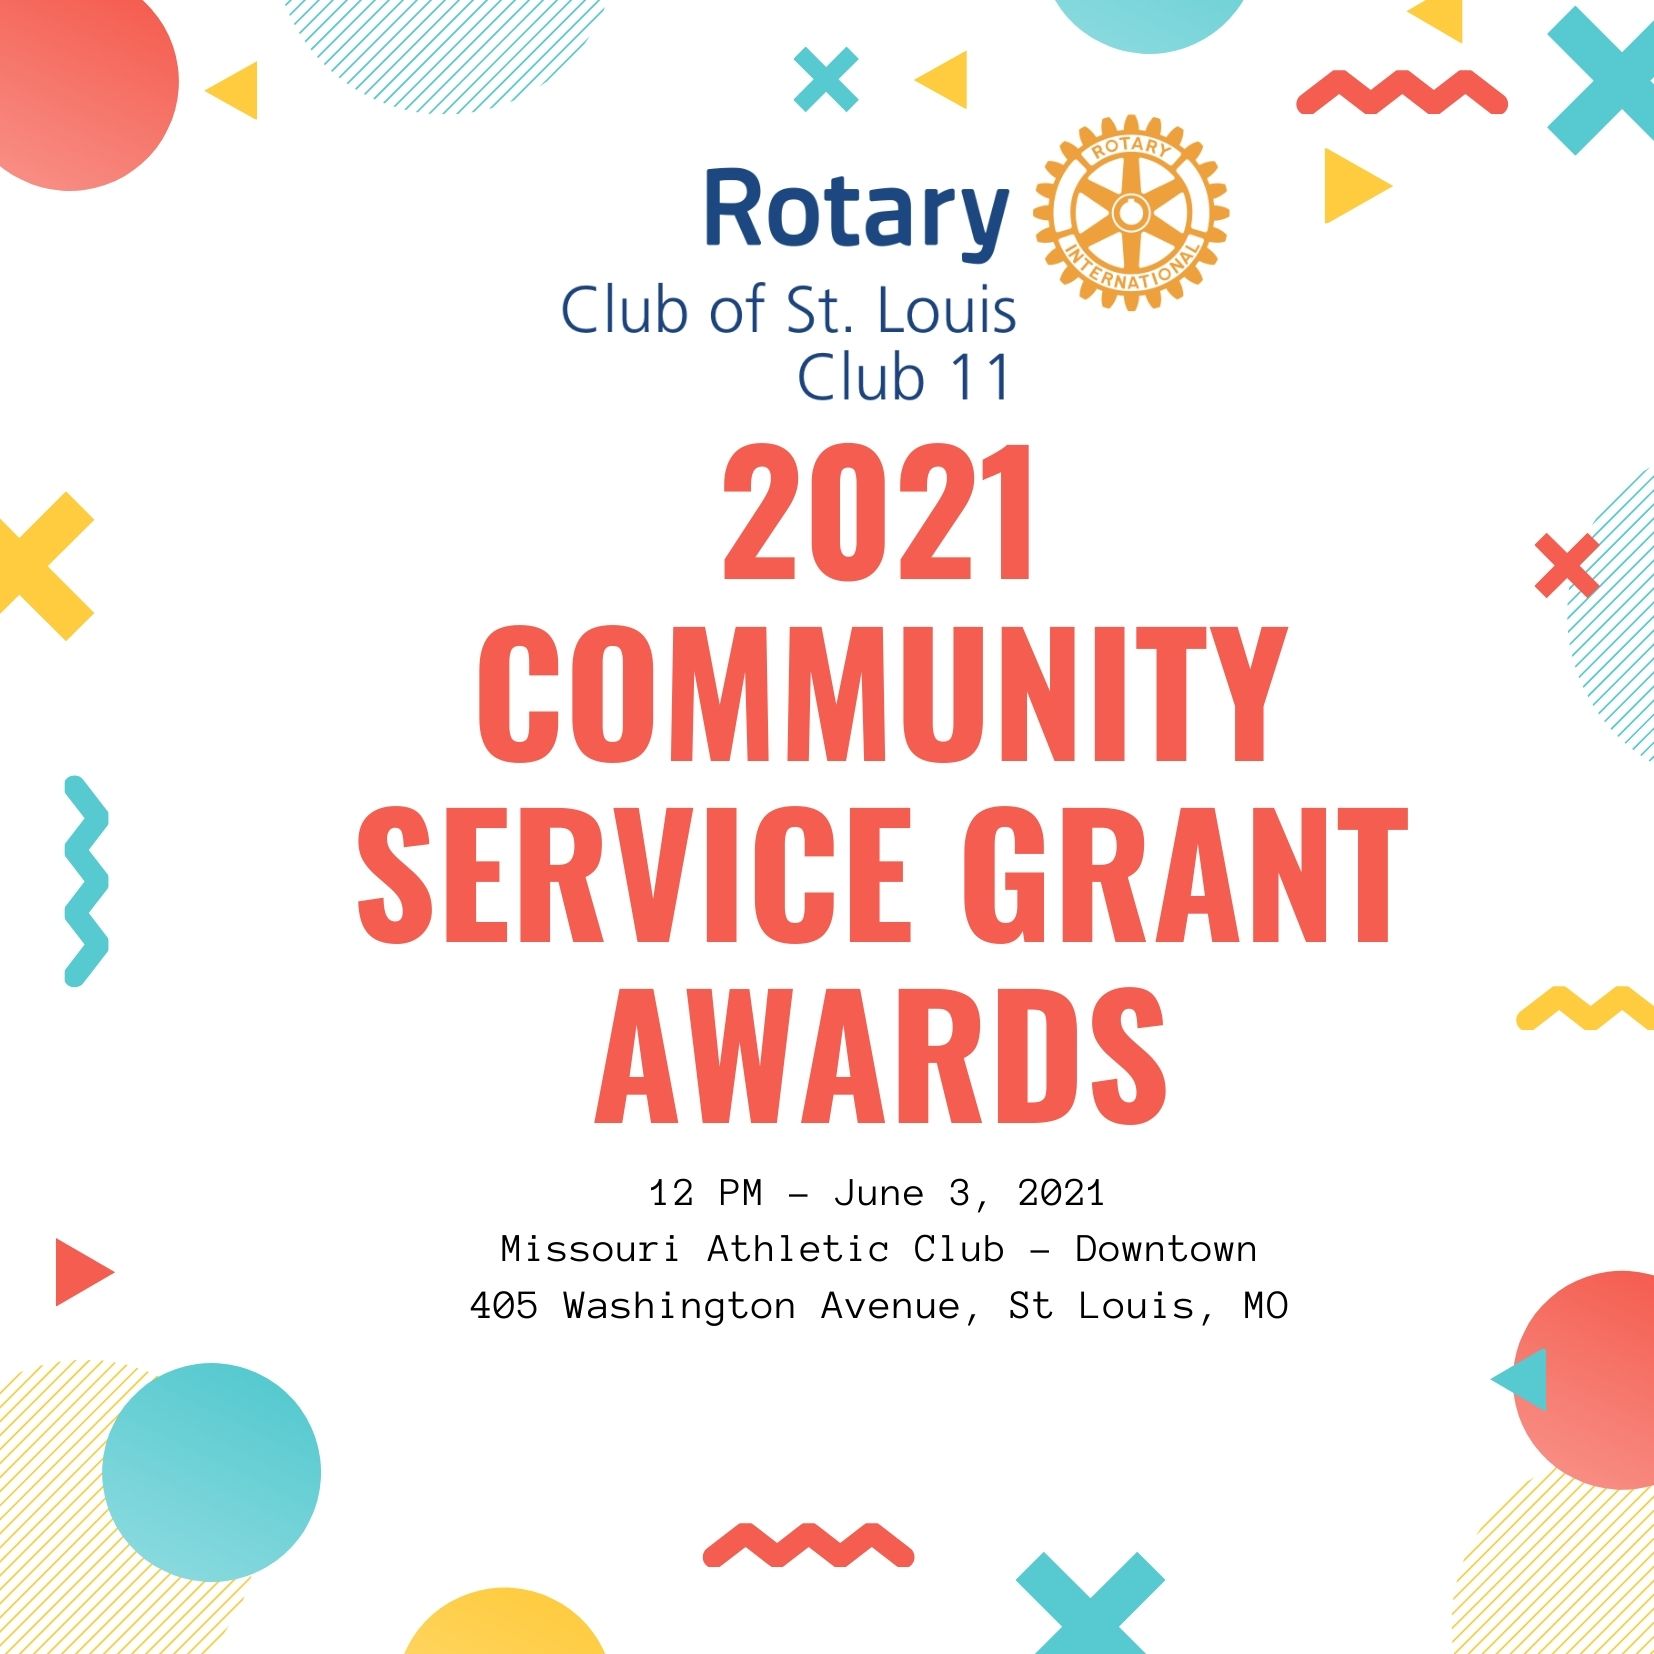 2021 Grant Awards @ St Louis Rotary on June 3, 2021